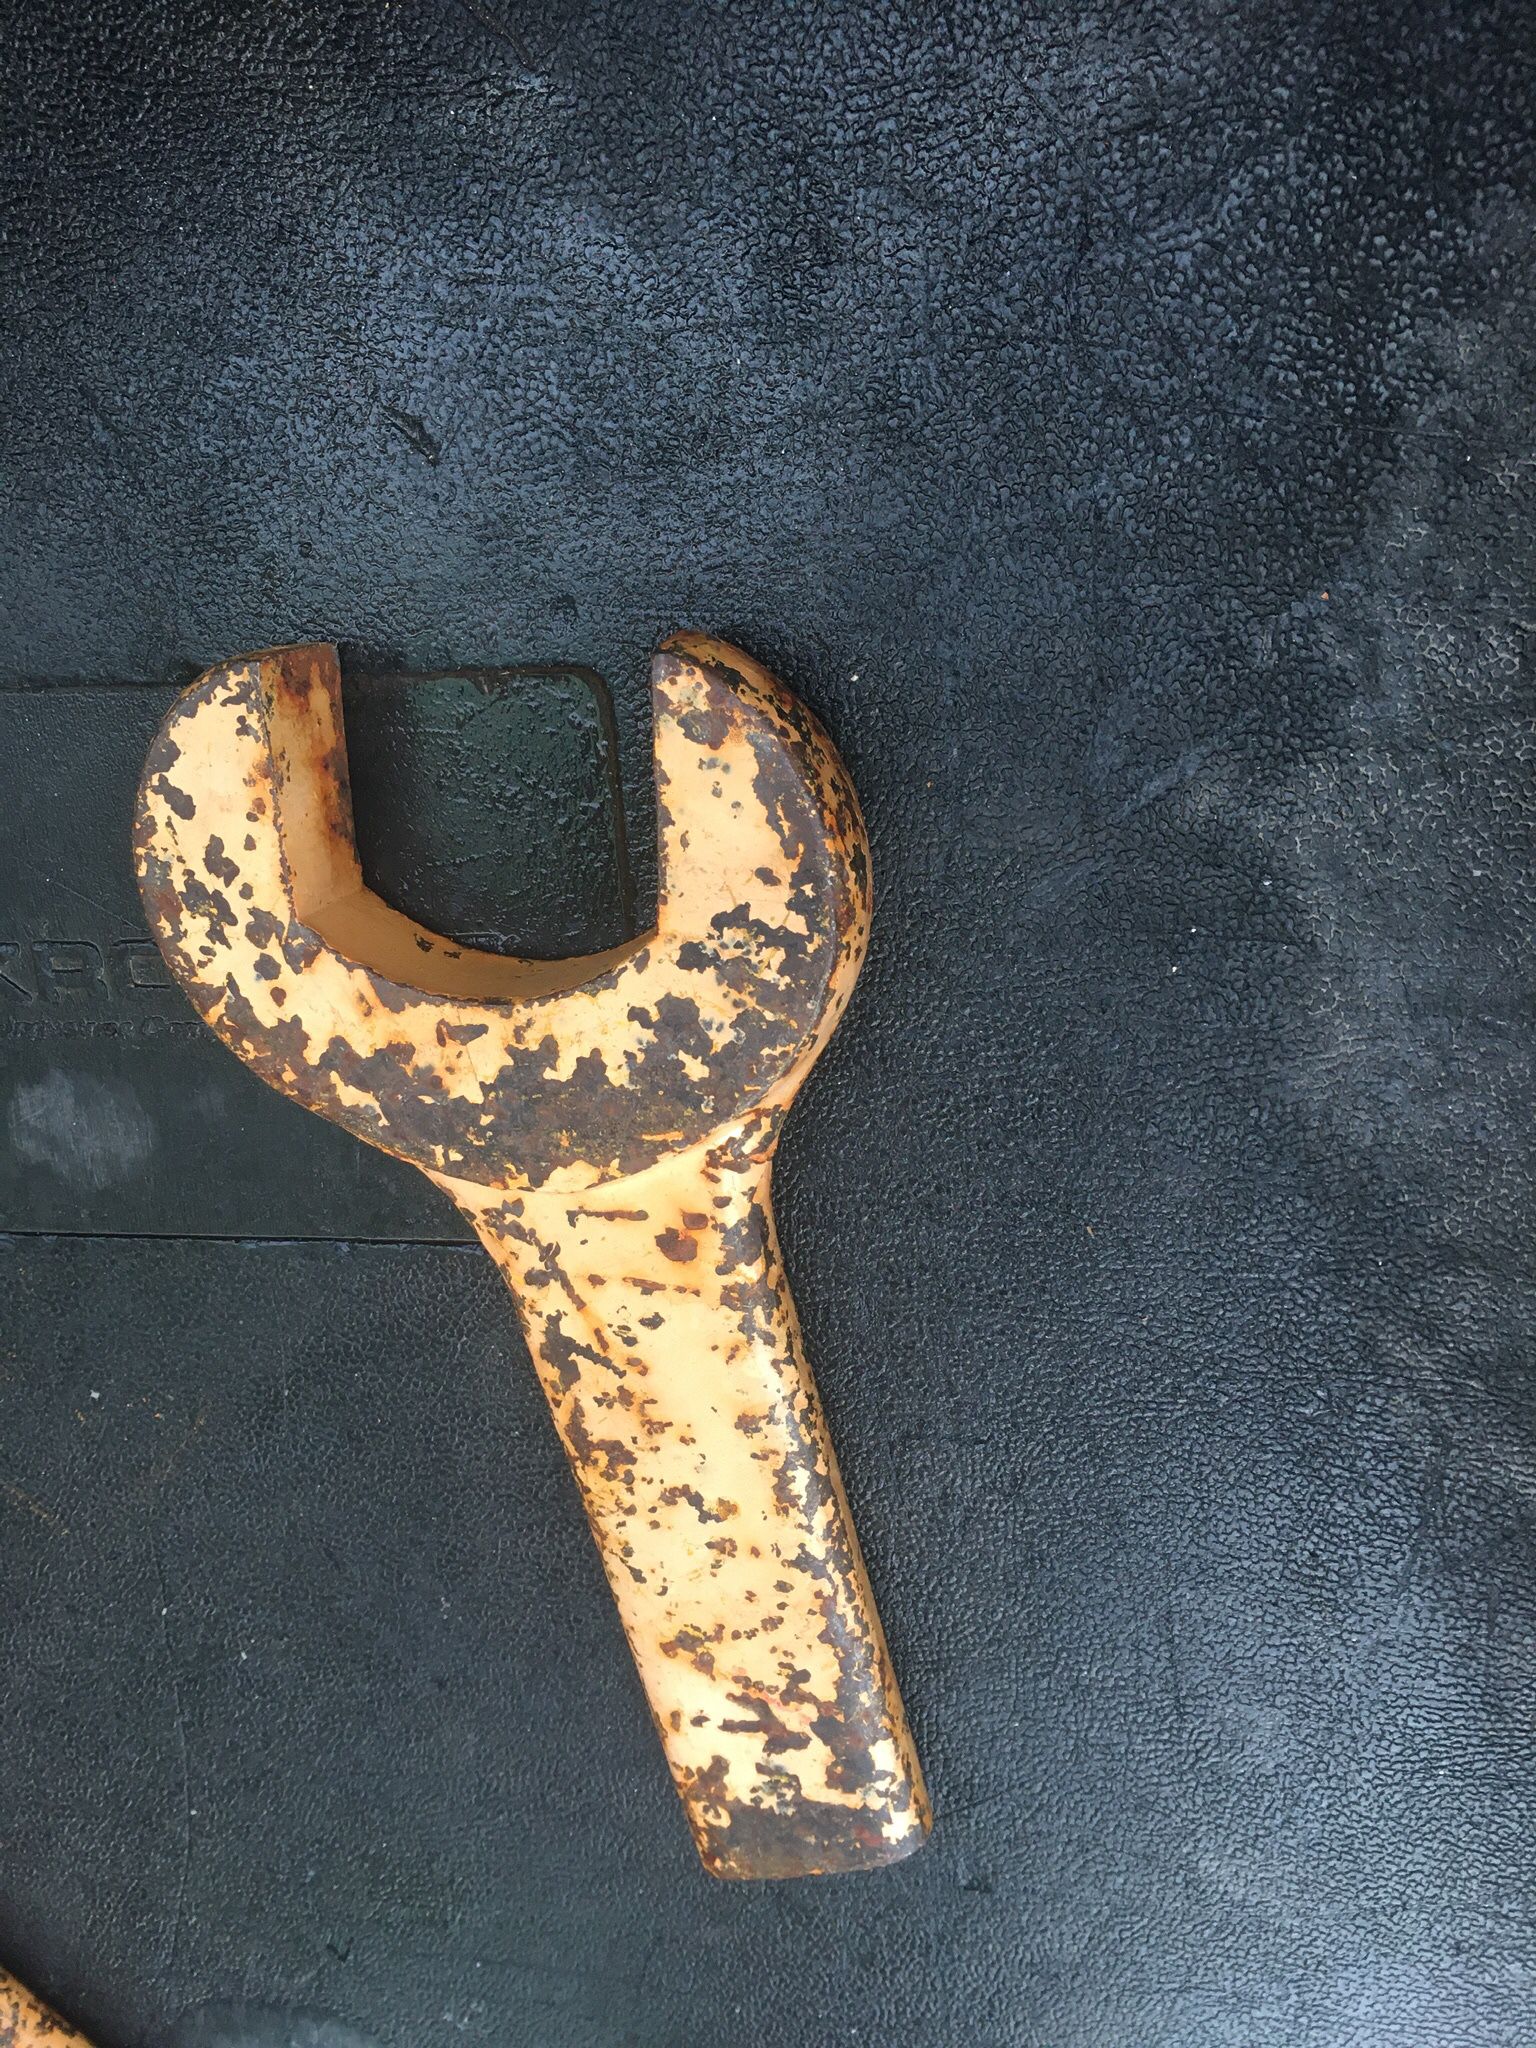 Larger Open End Wrenches For Backhoe Or Other Heavy Equip. Ect.